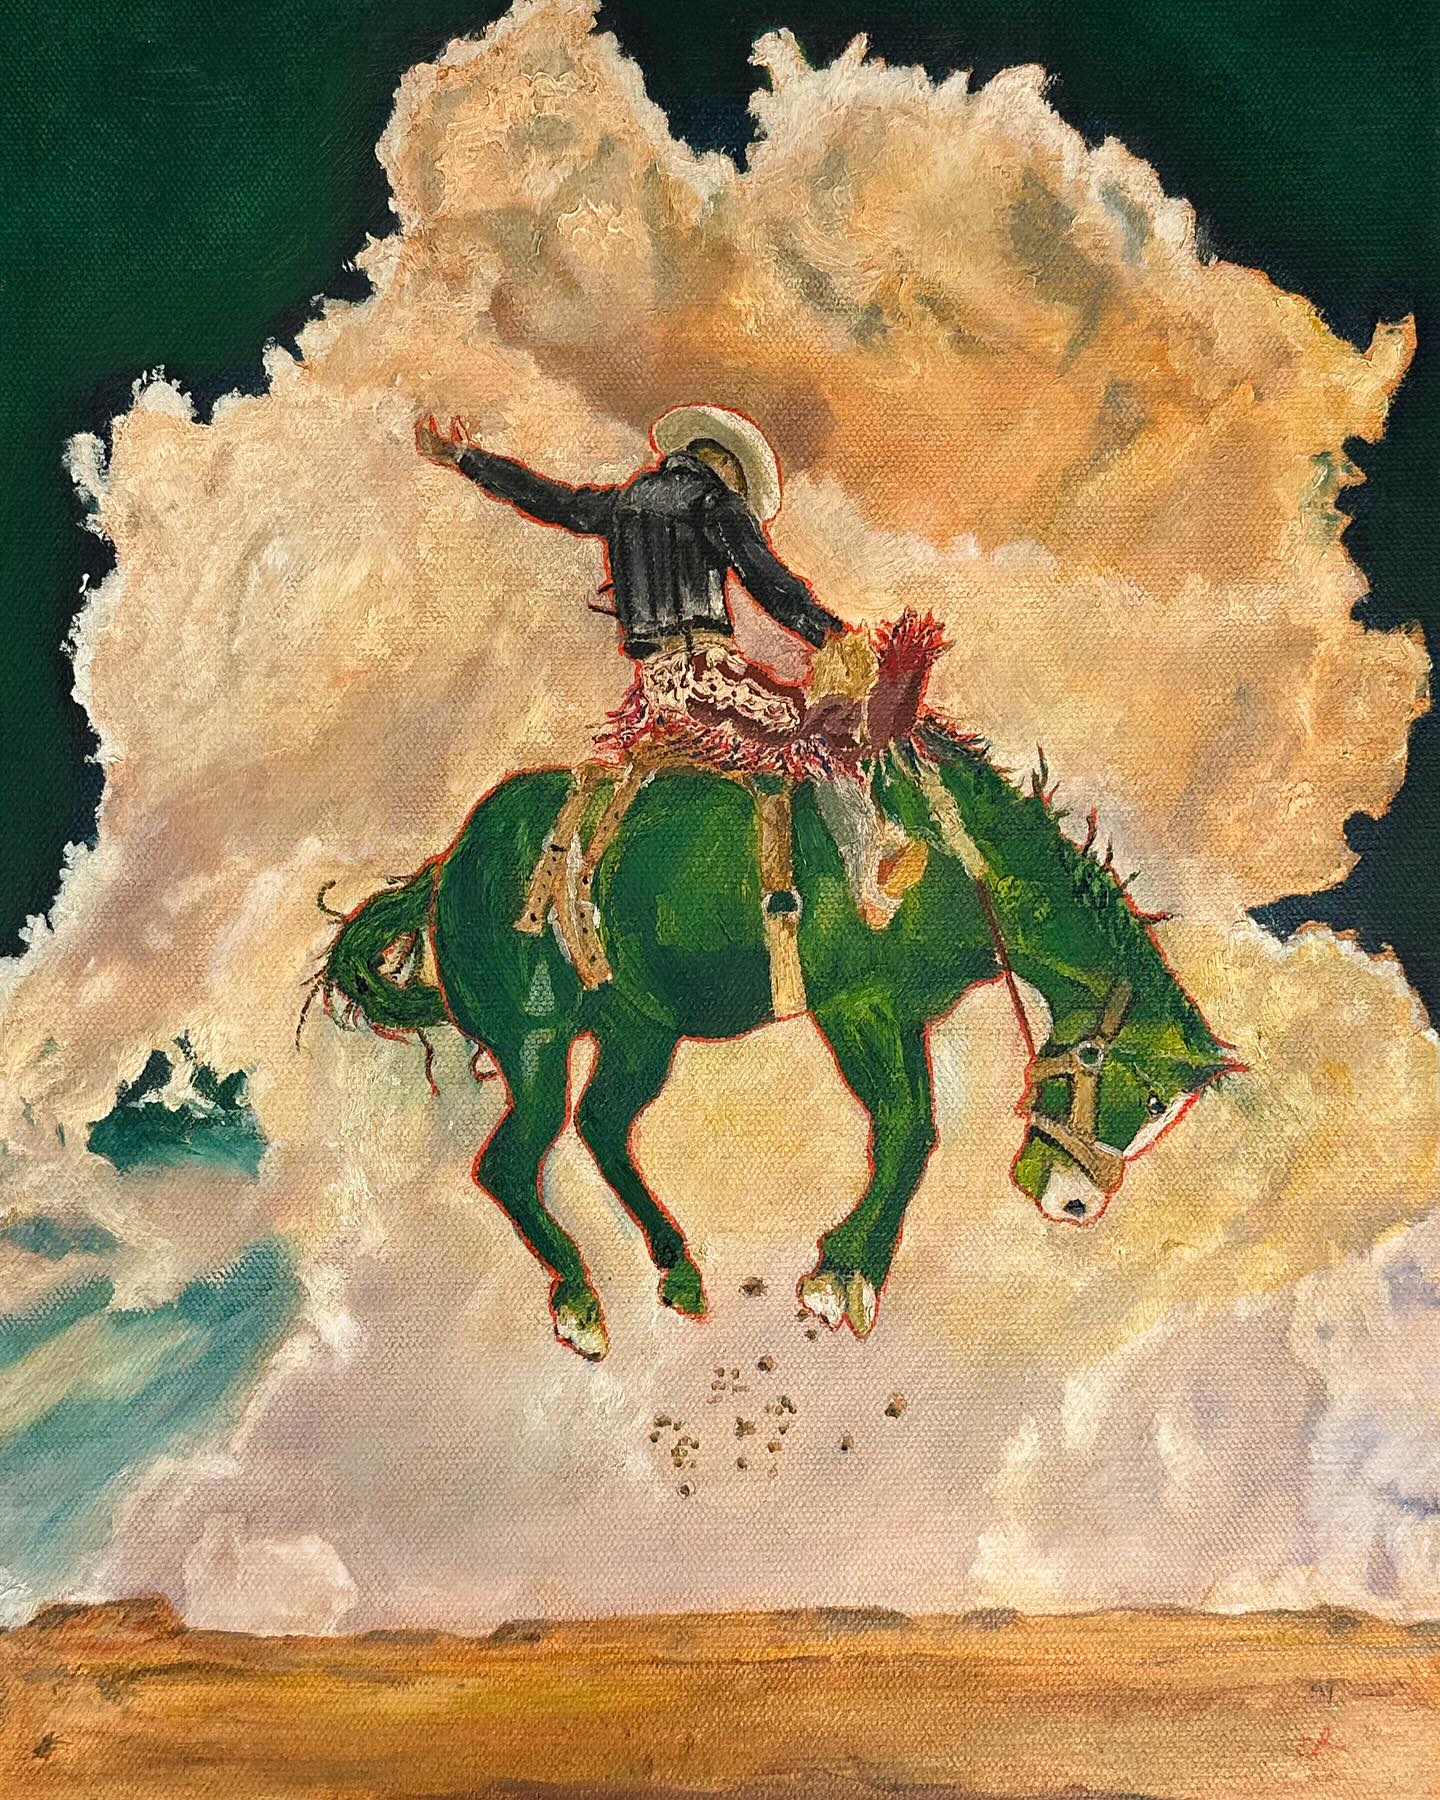 Green Horse Bucking Oil on Canvas by Chris Reecer